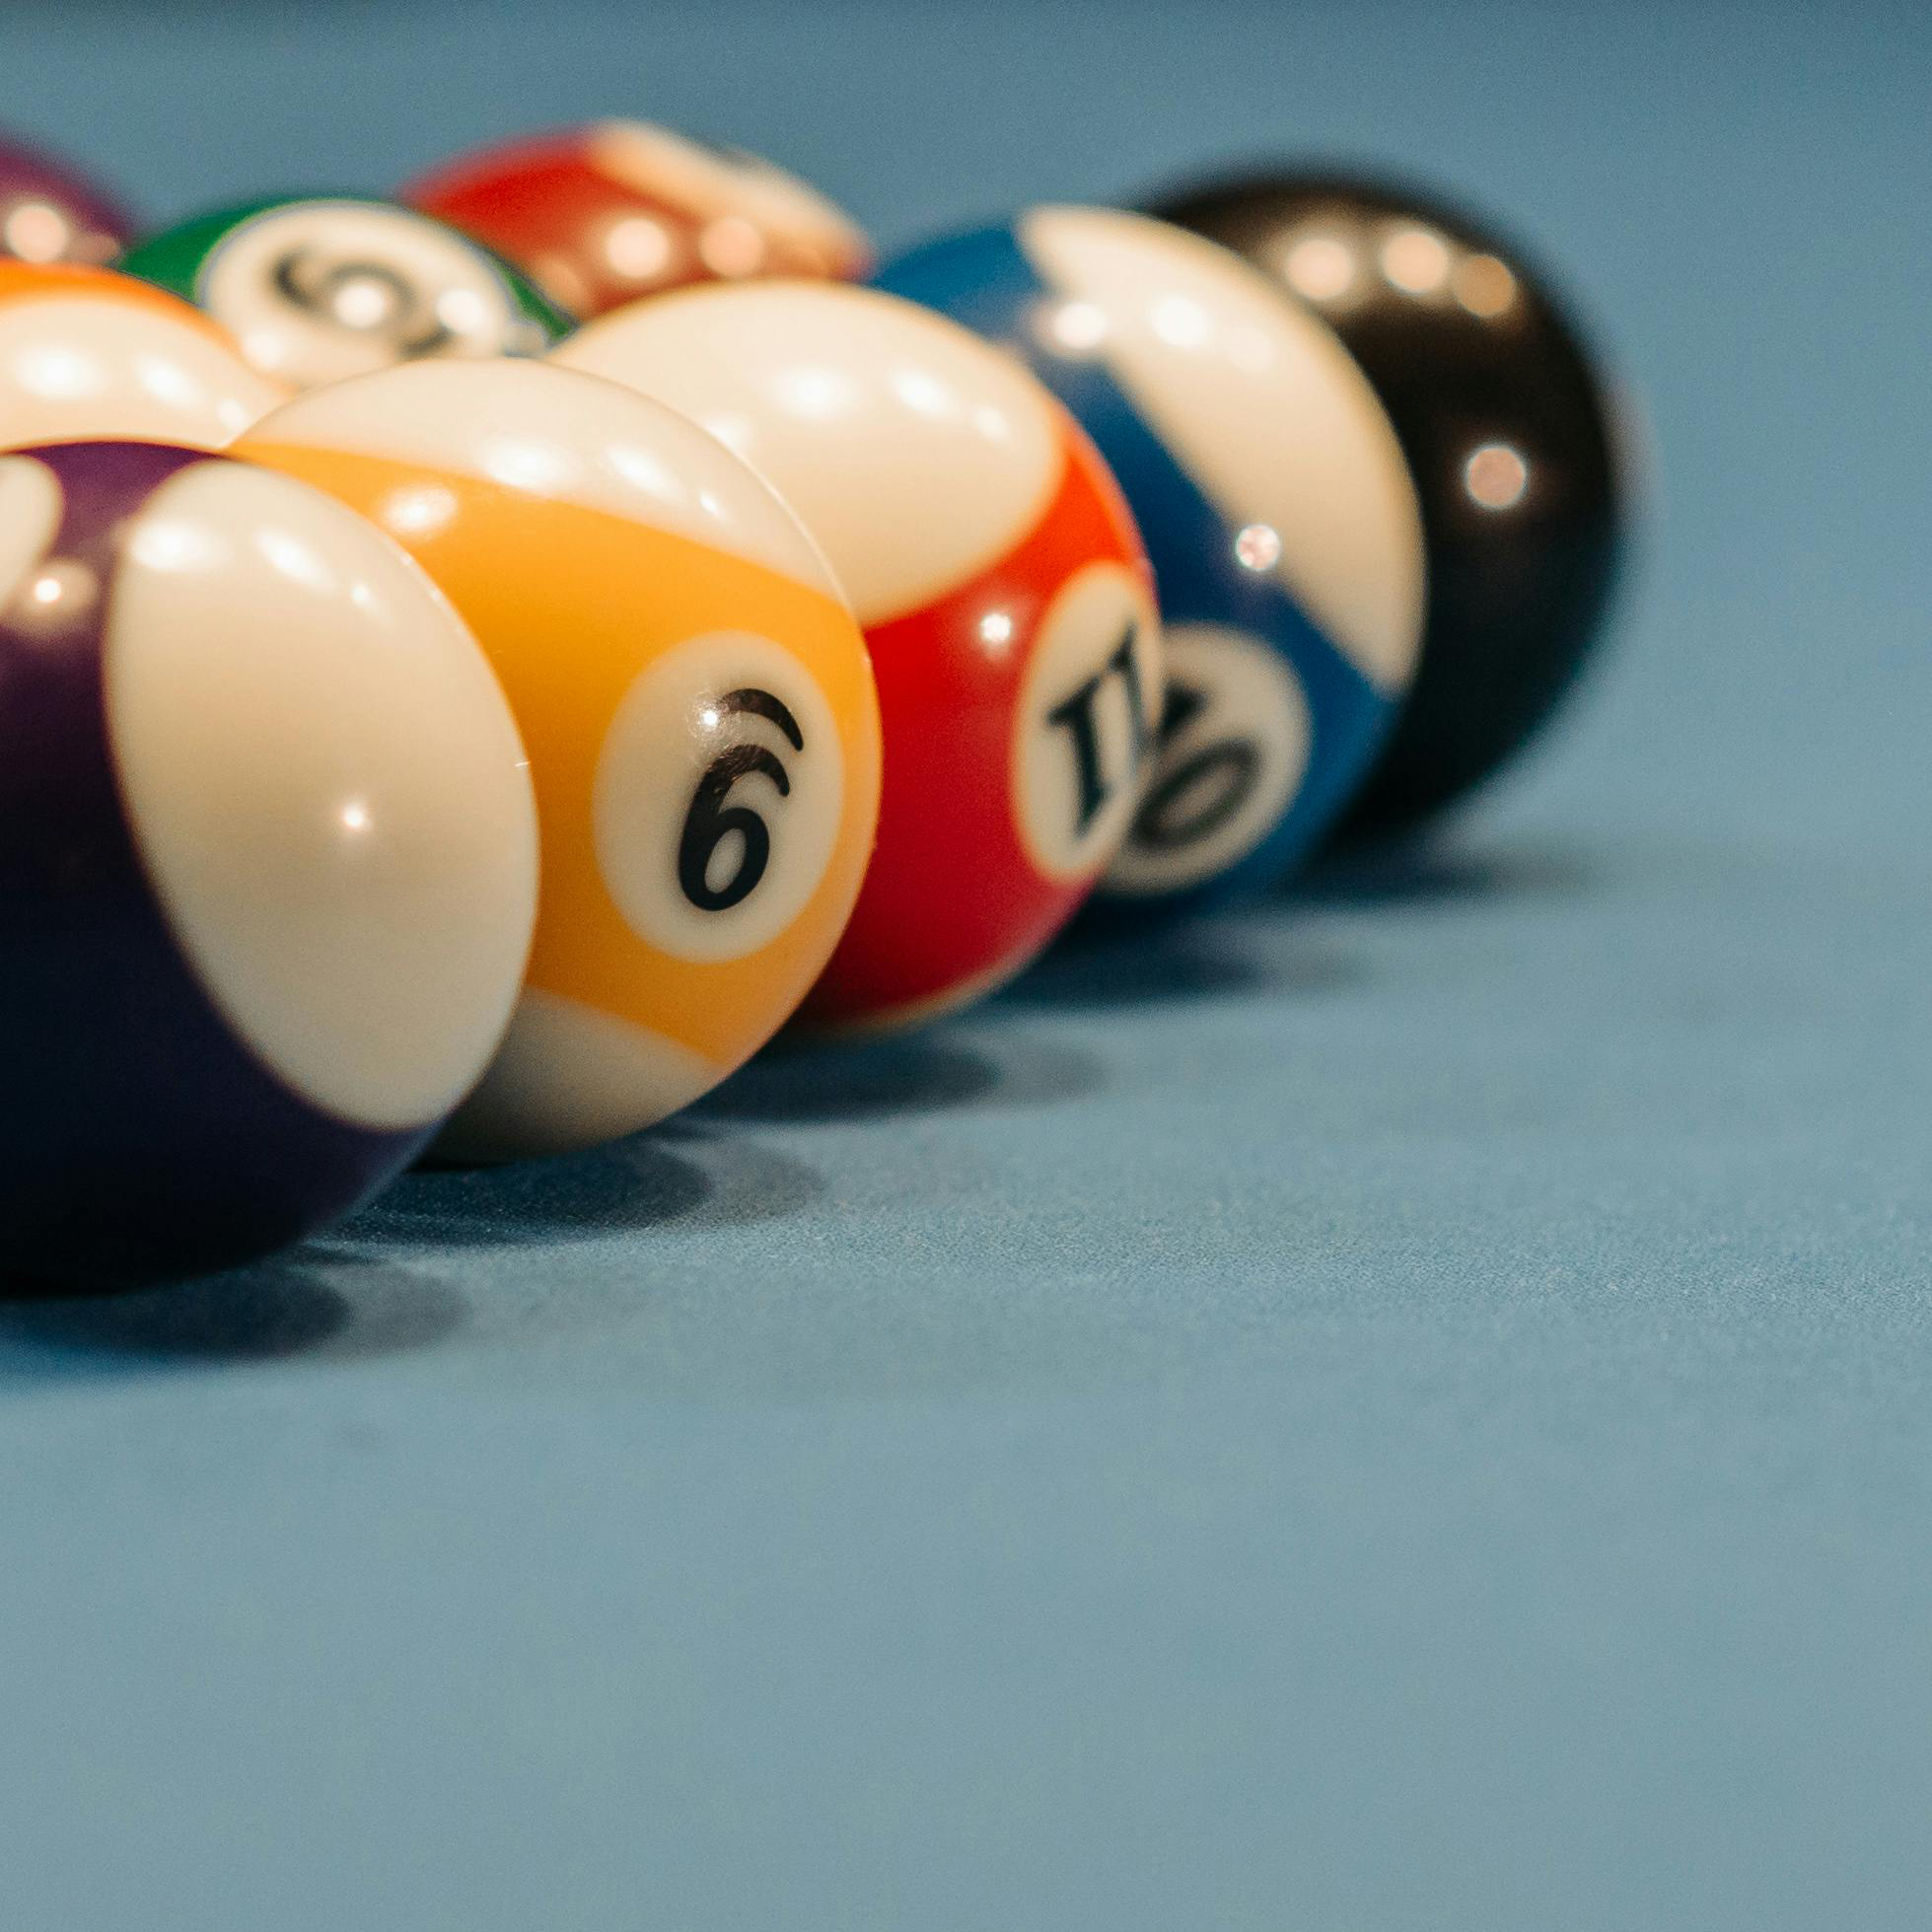 Pool Tables 101: Understanding Different Types and Materials